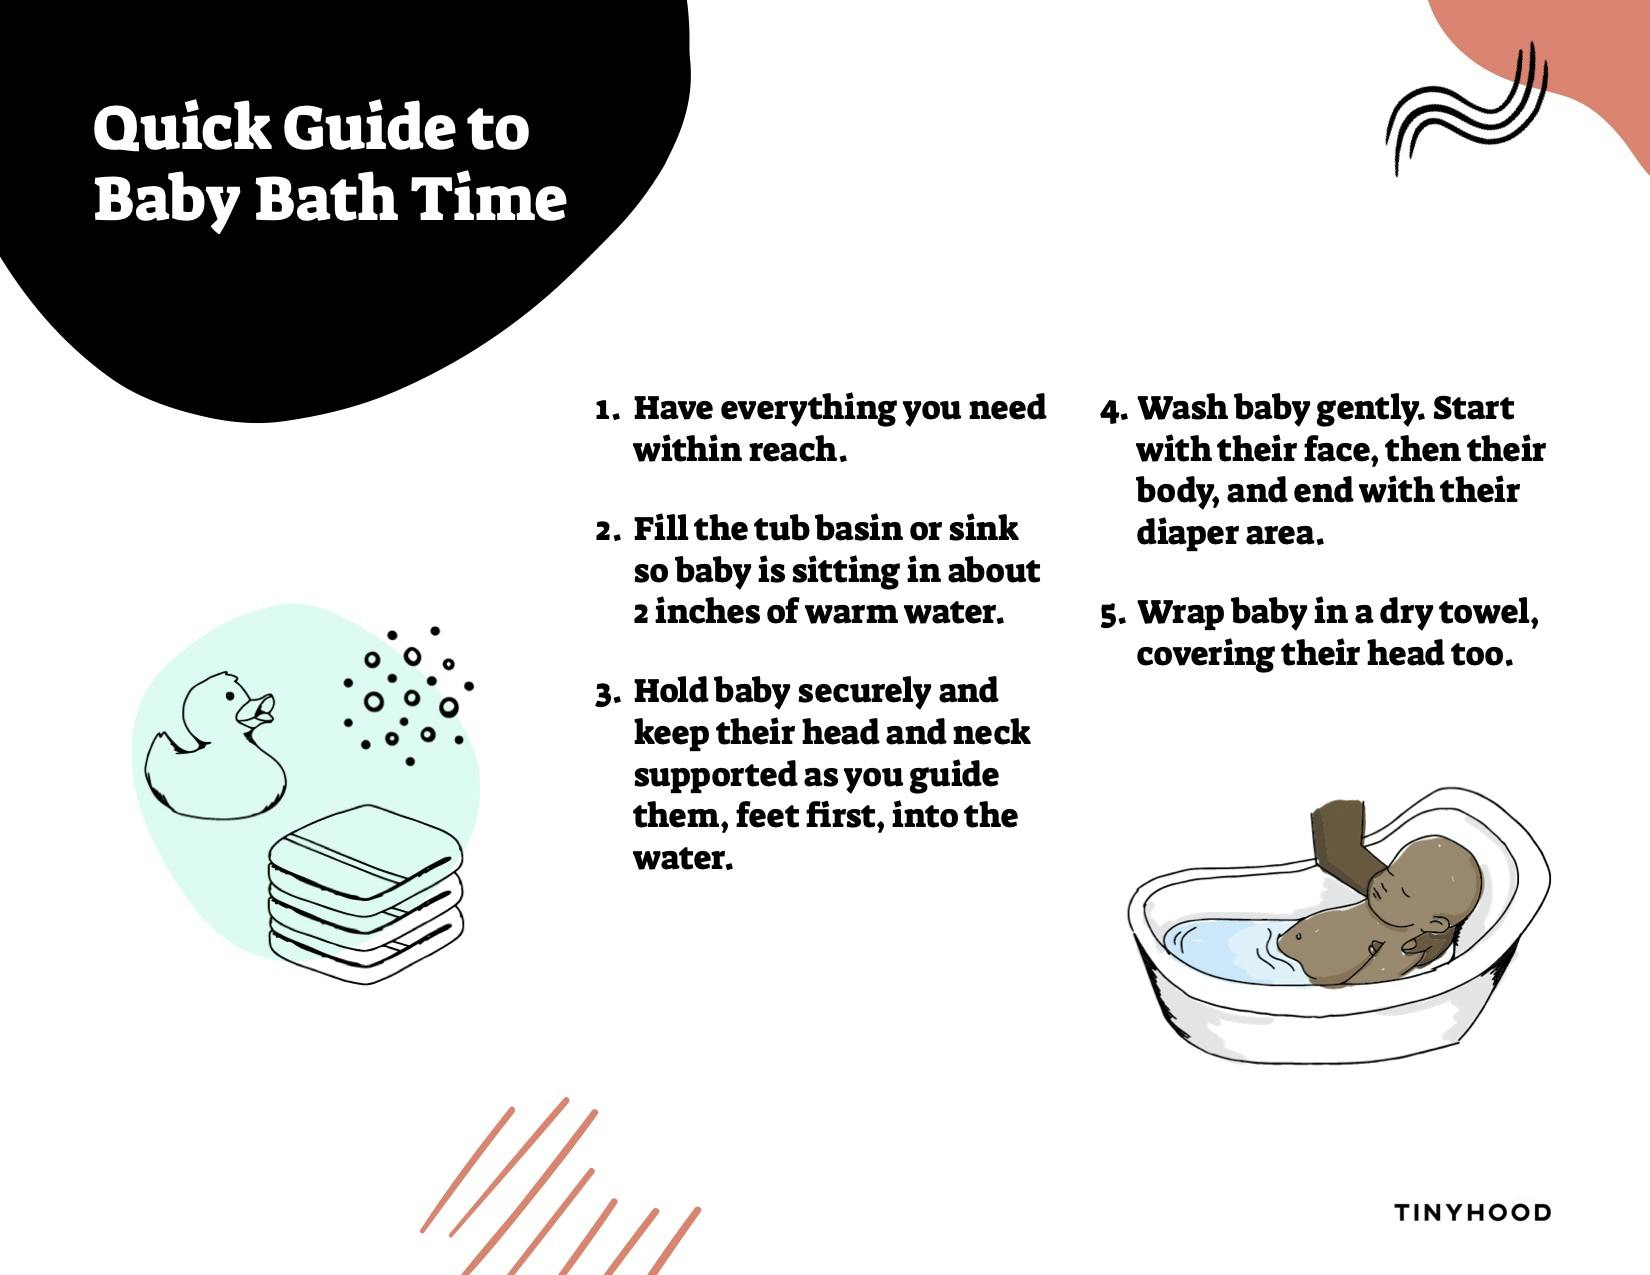 Baby bath time: steps to bathing a baby